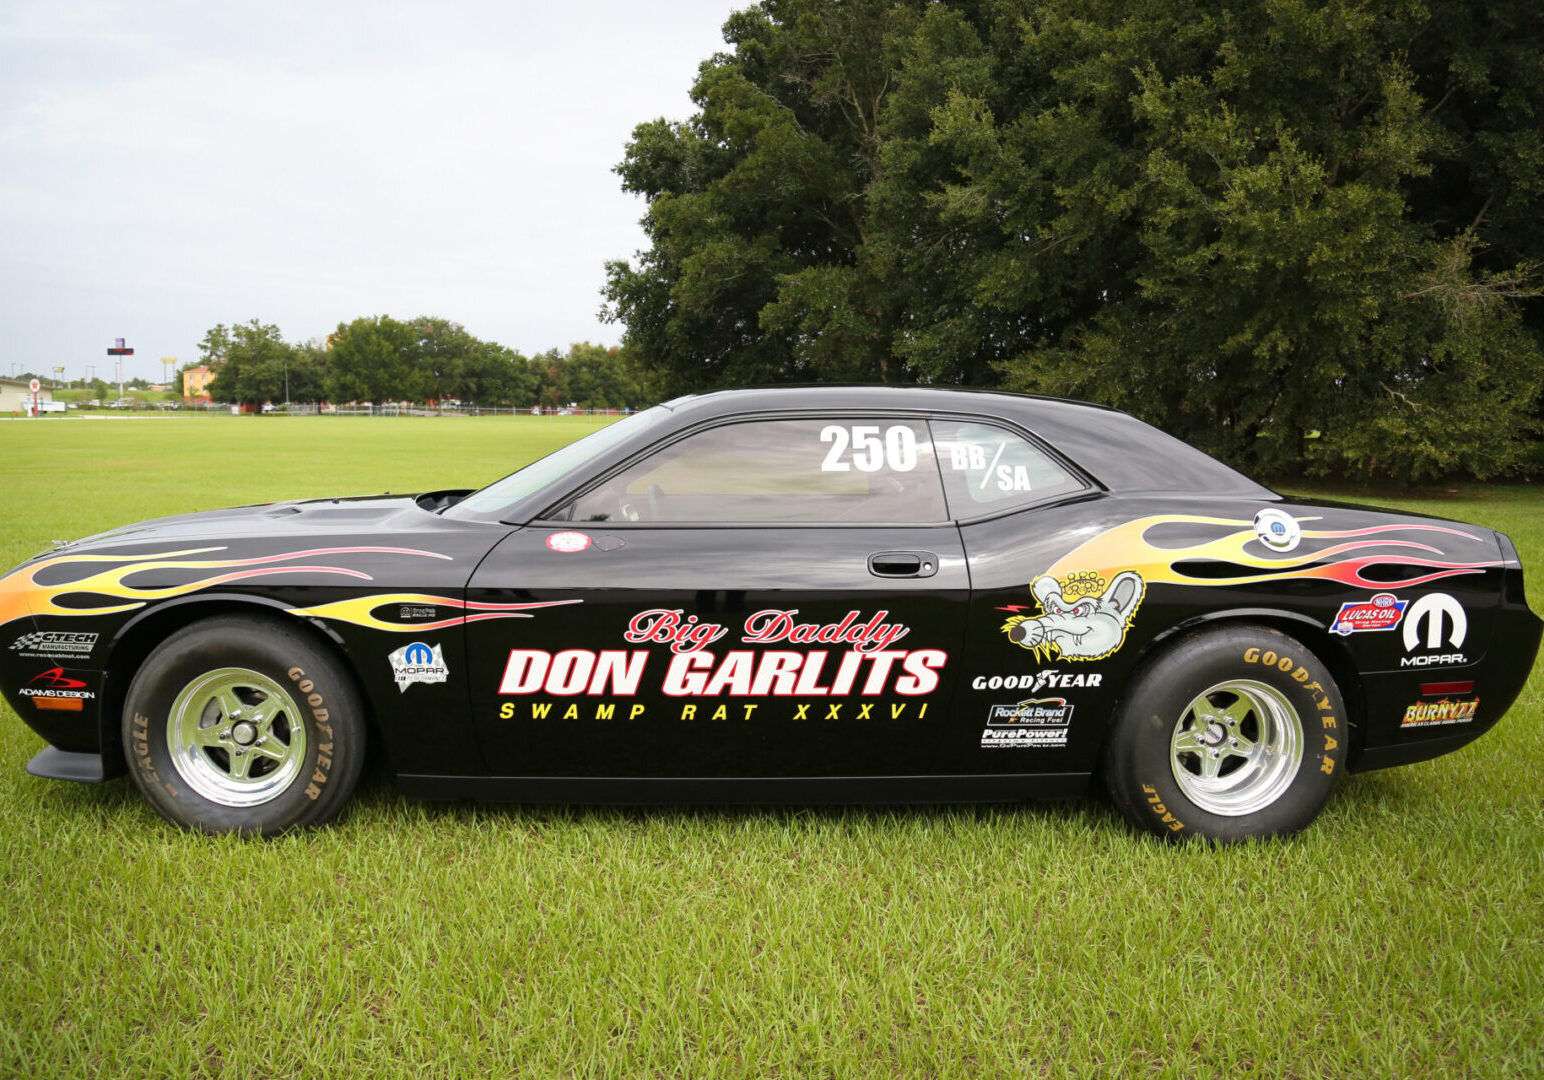 A black car with flames on it is parked in a field, hinting at its connection to the world of drag racing.